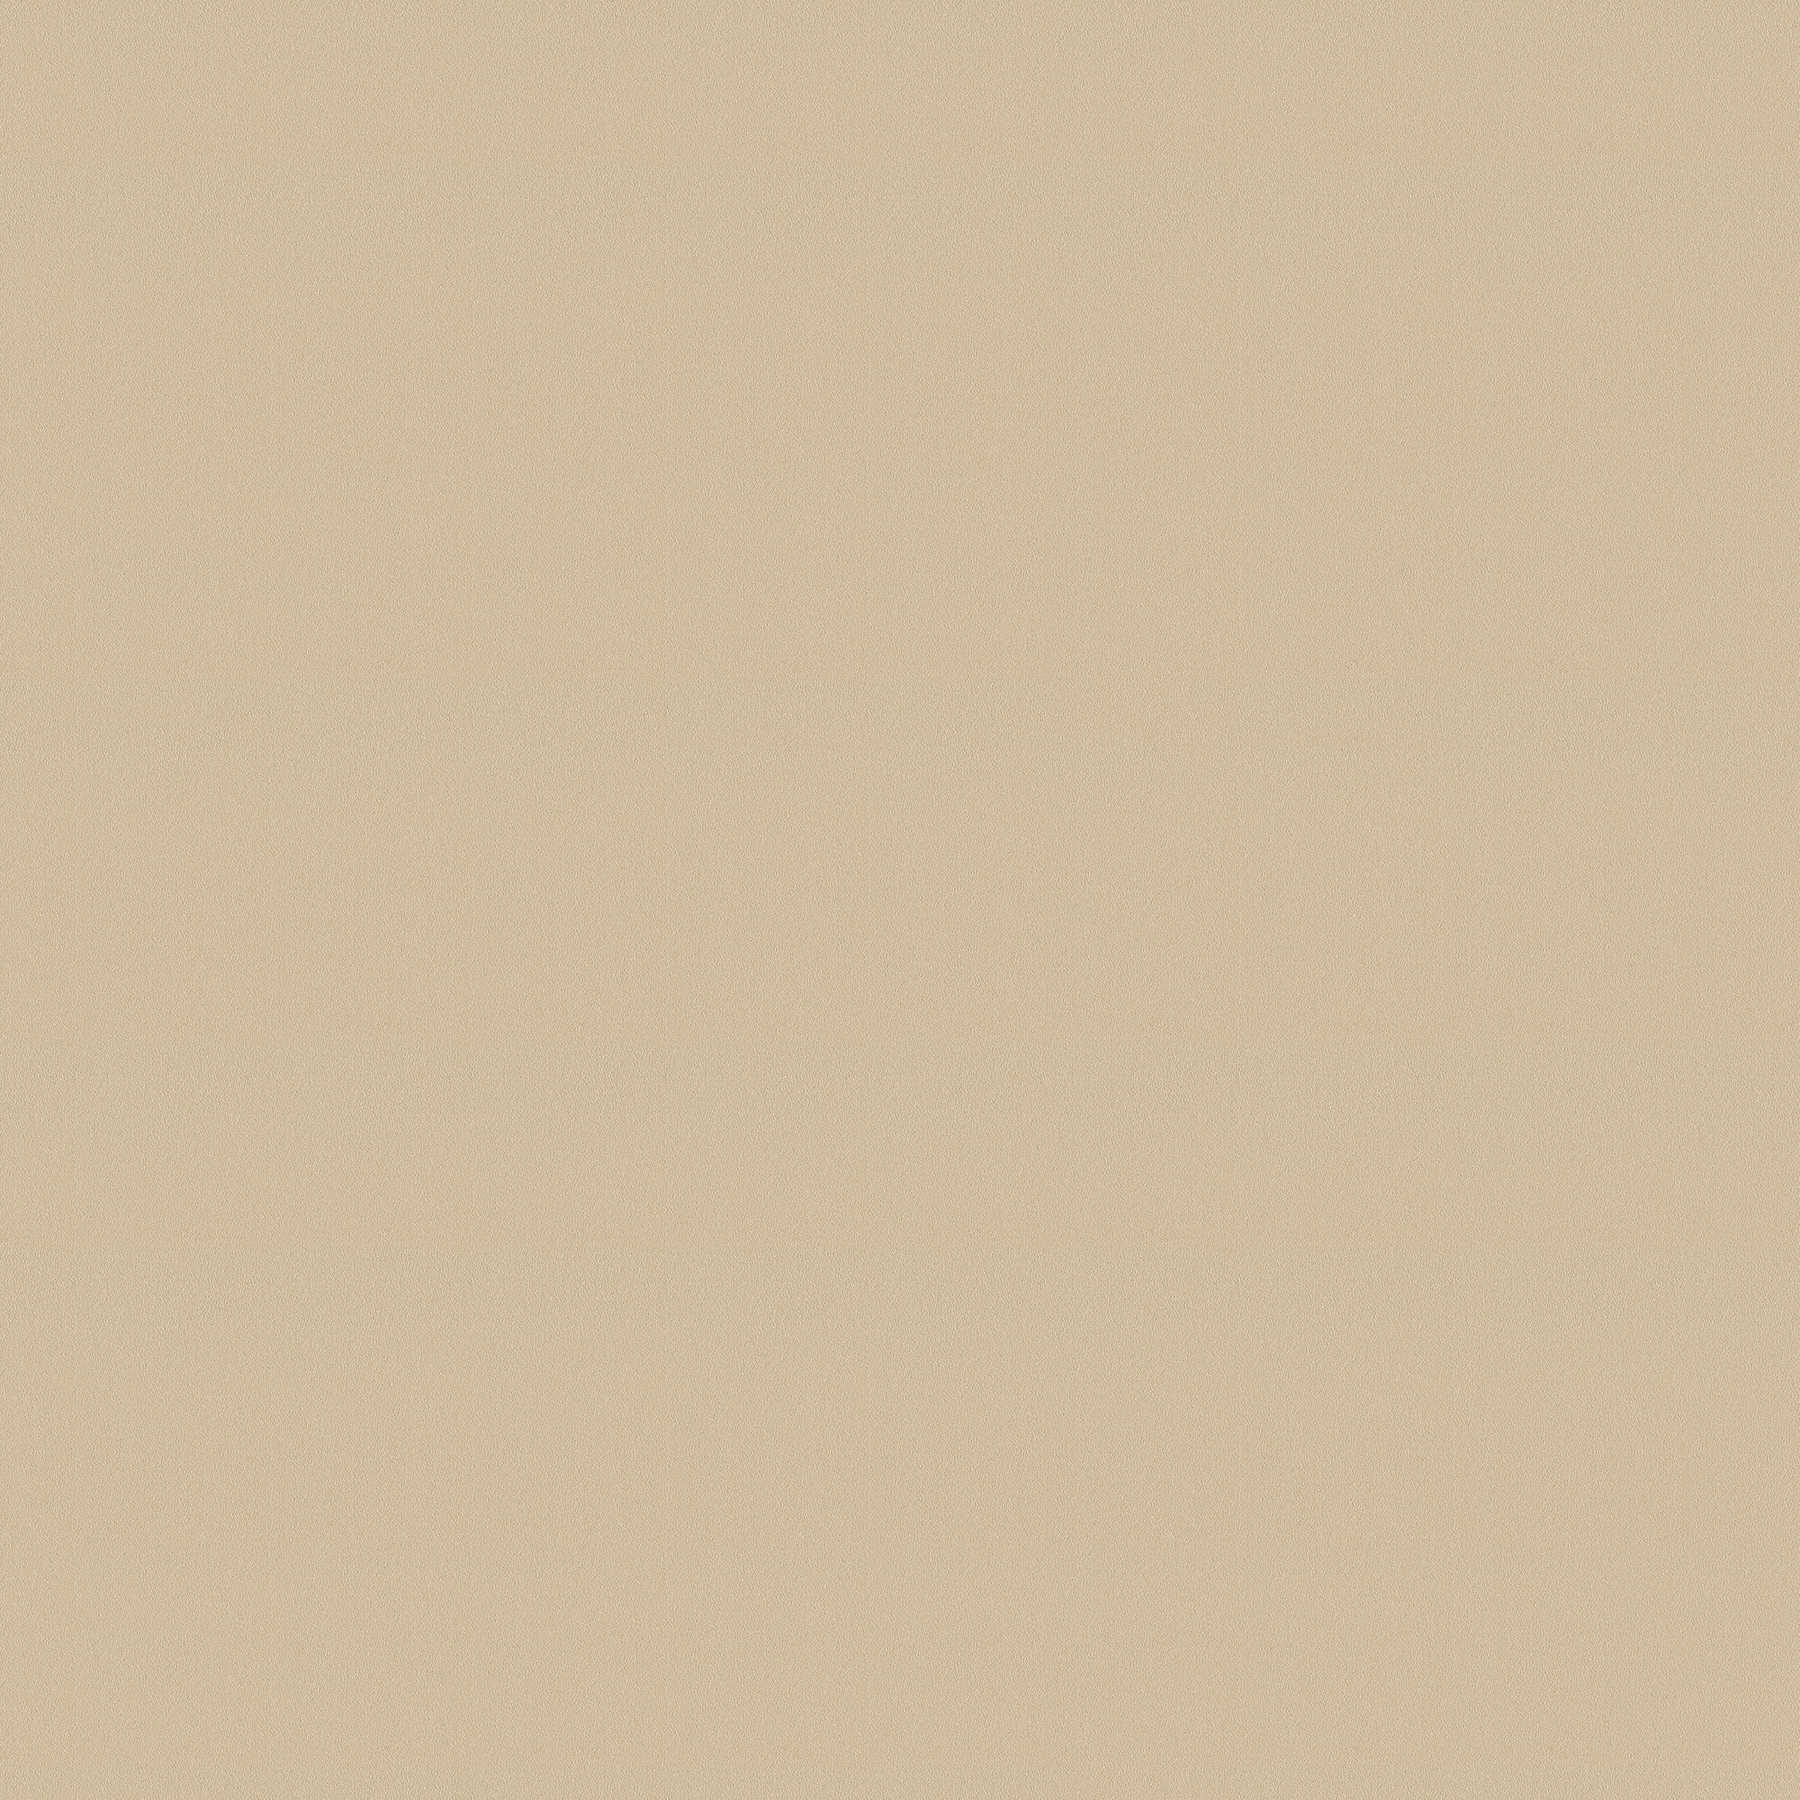 Plain wallpaper beige with flat structure pattern
